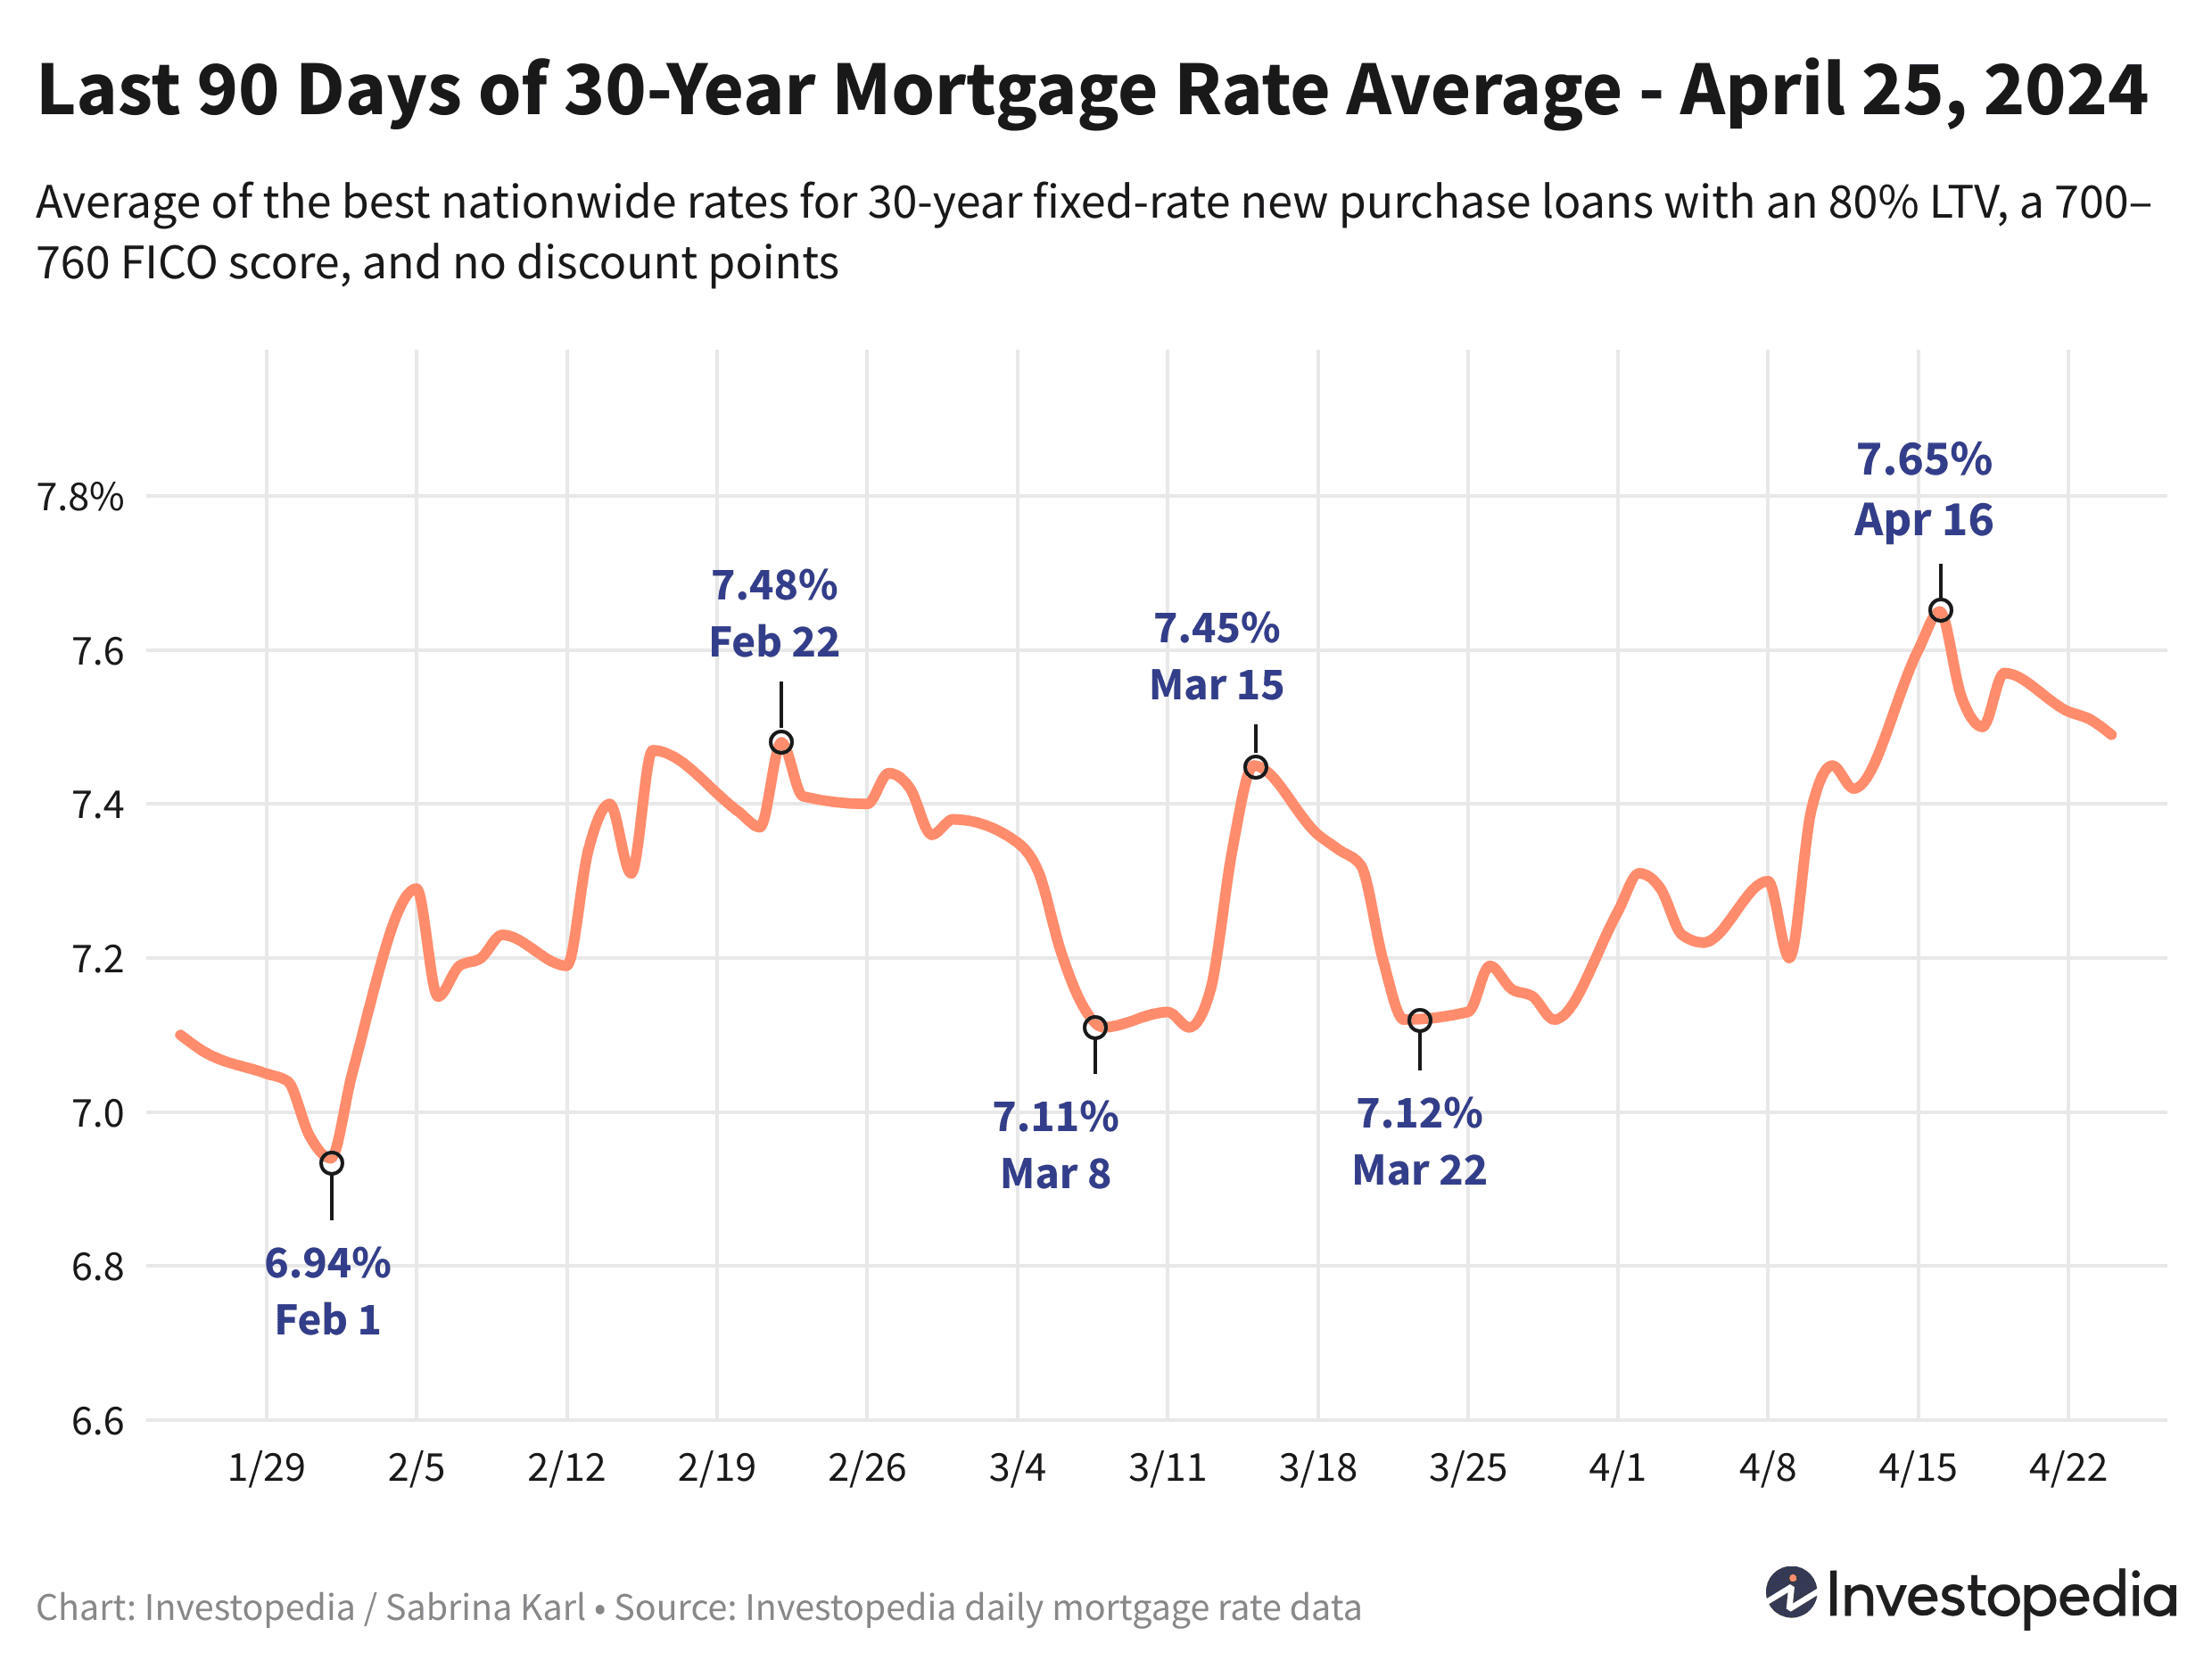 Line graph showing the last 90 days of the 30-year new purchase mortgage rate average - April 25, 2024